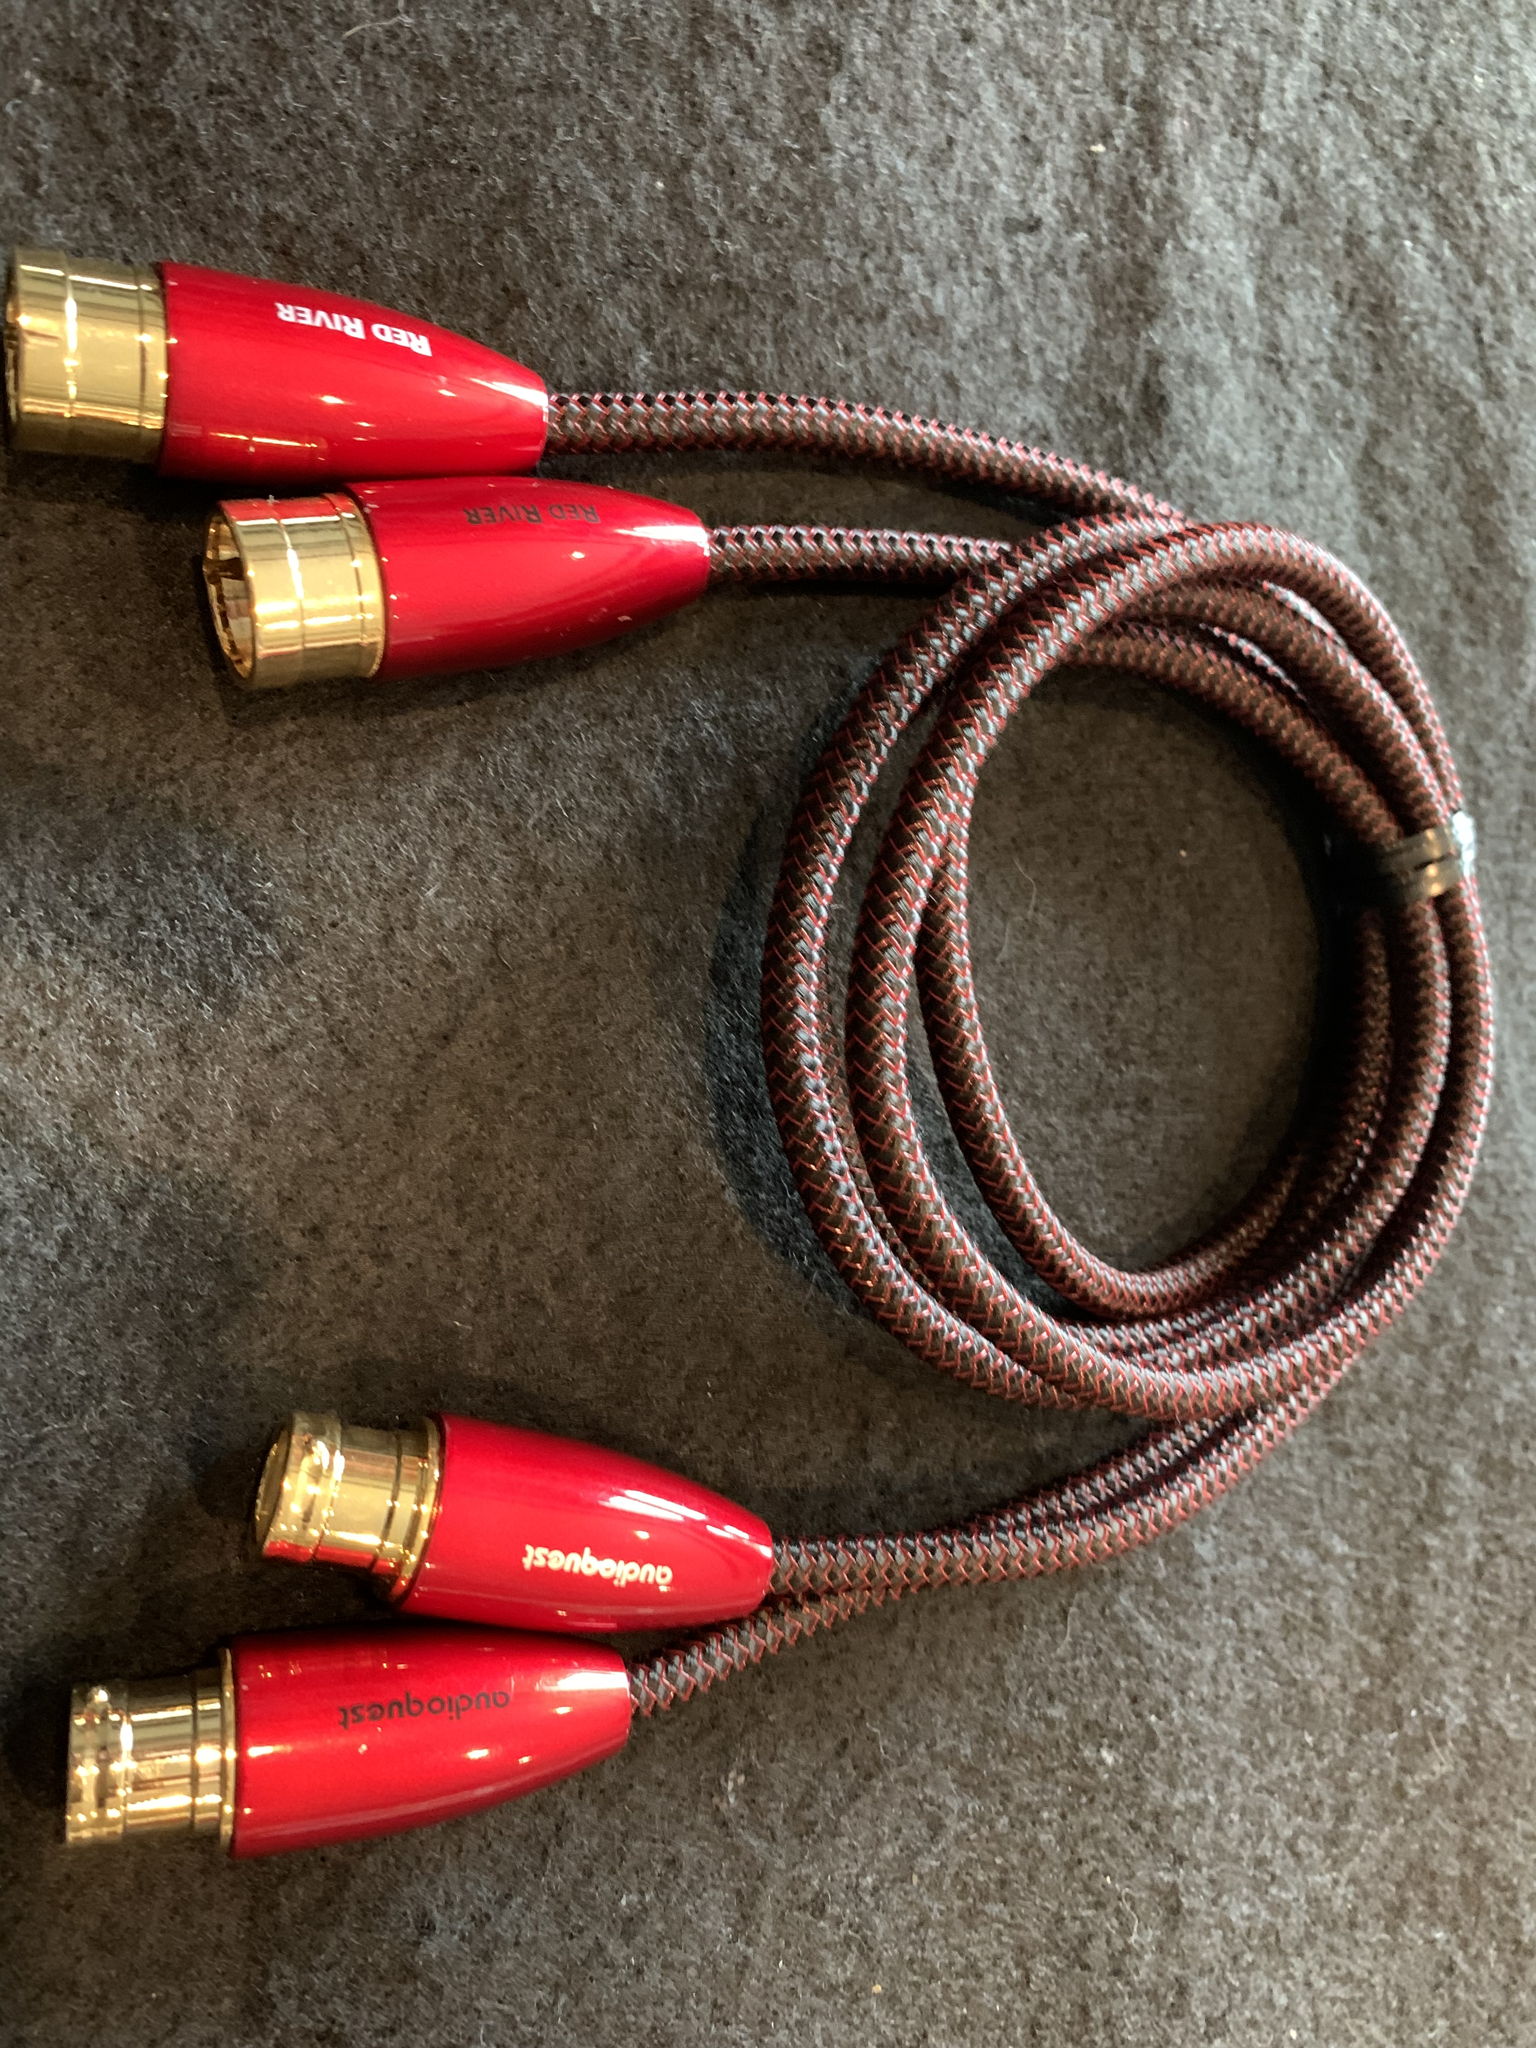 AudioQuest Red River 1m XLR to XLR Interconnects Looks ... 3